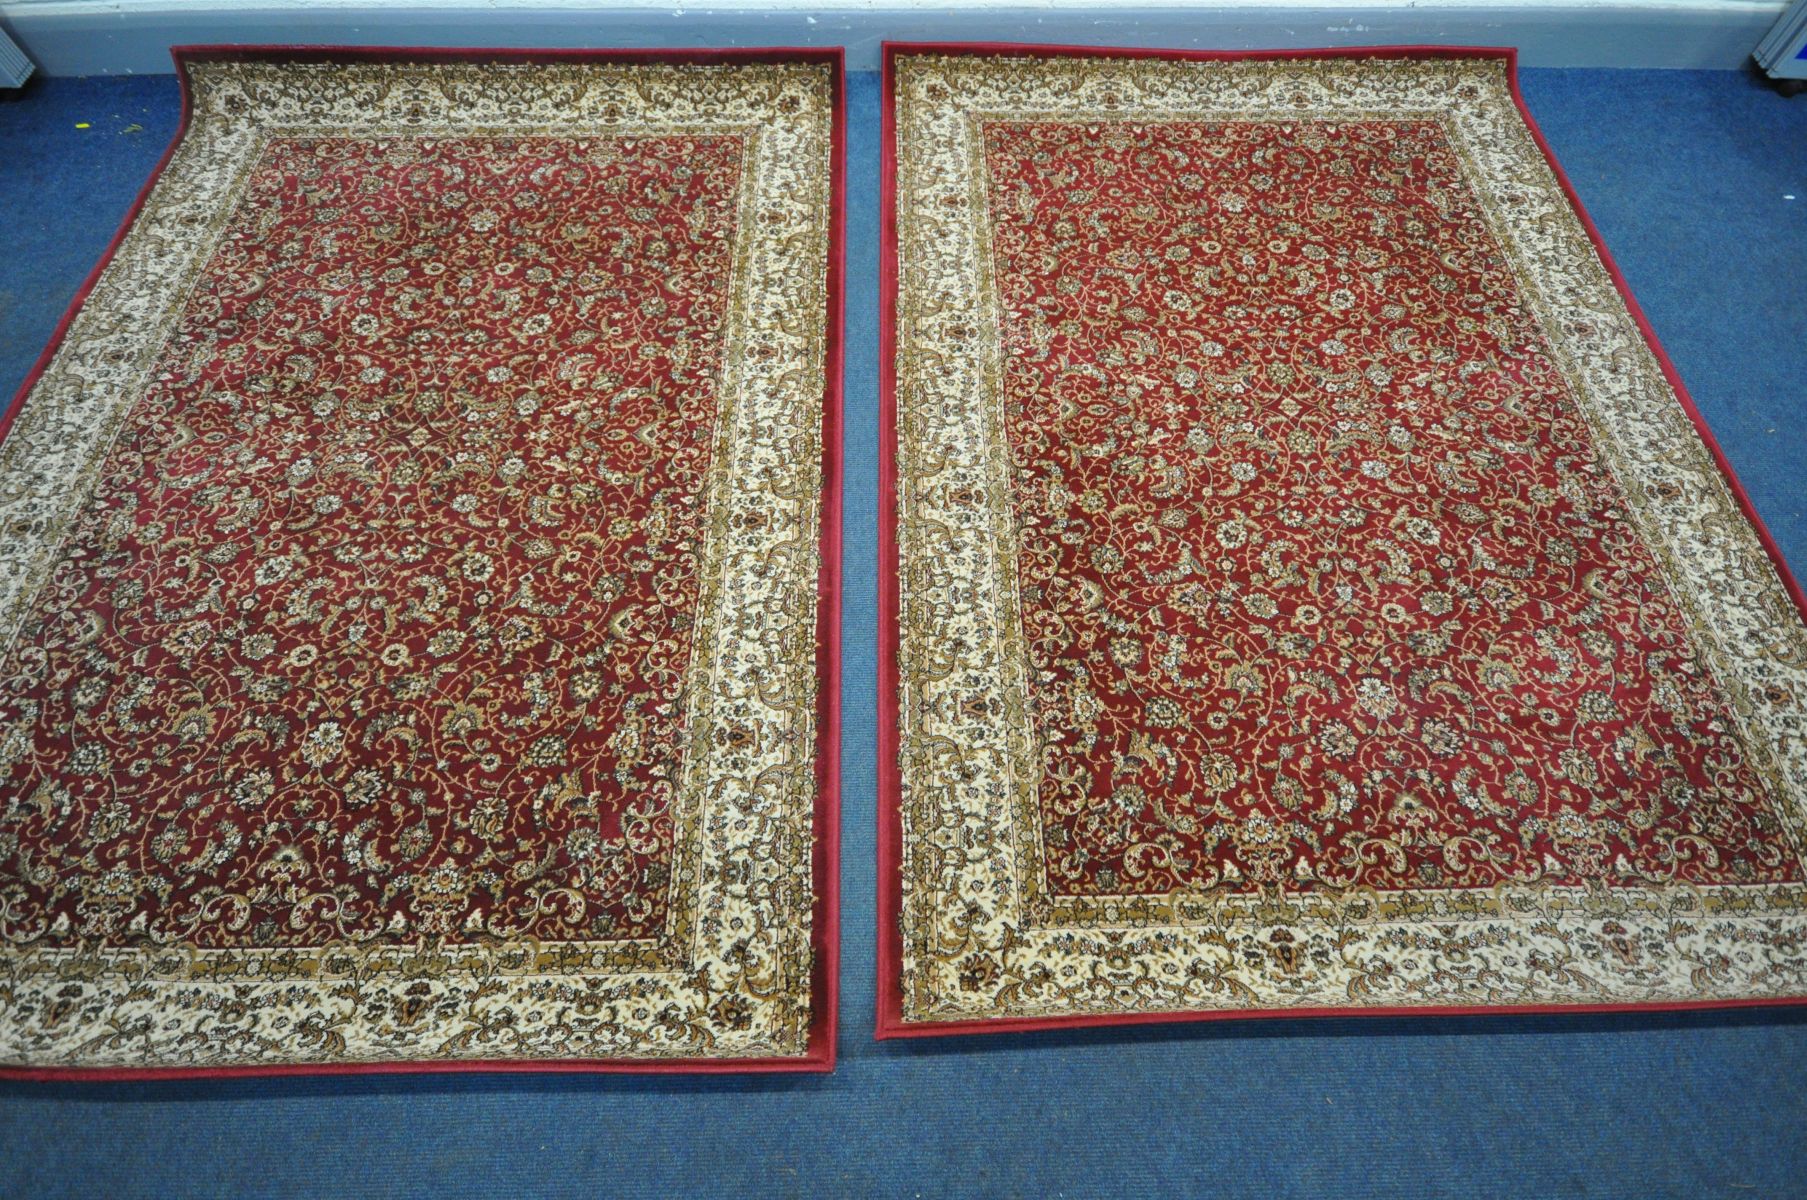 TWO LATE 20TH CENTURY RED AND CREAM ORIENTAL RUGS, made by Dunelm, 230cm x 160cm